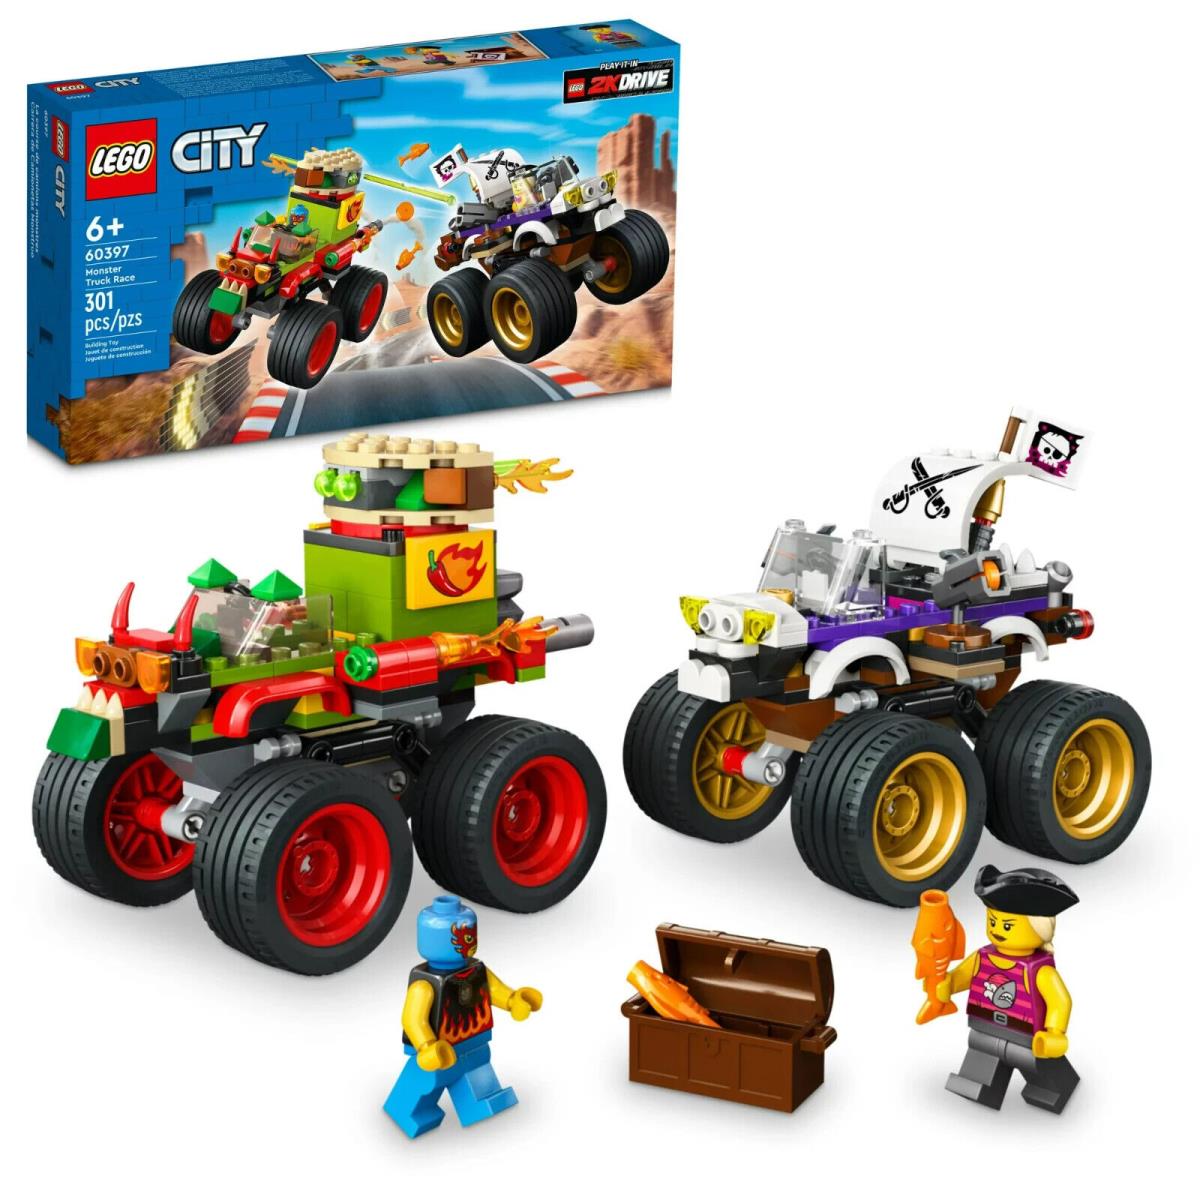 Lego City Monster Truck Race 60397 Toy Car Building Set Toy For 7 Year Old Boys